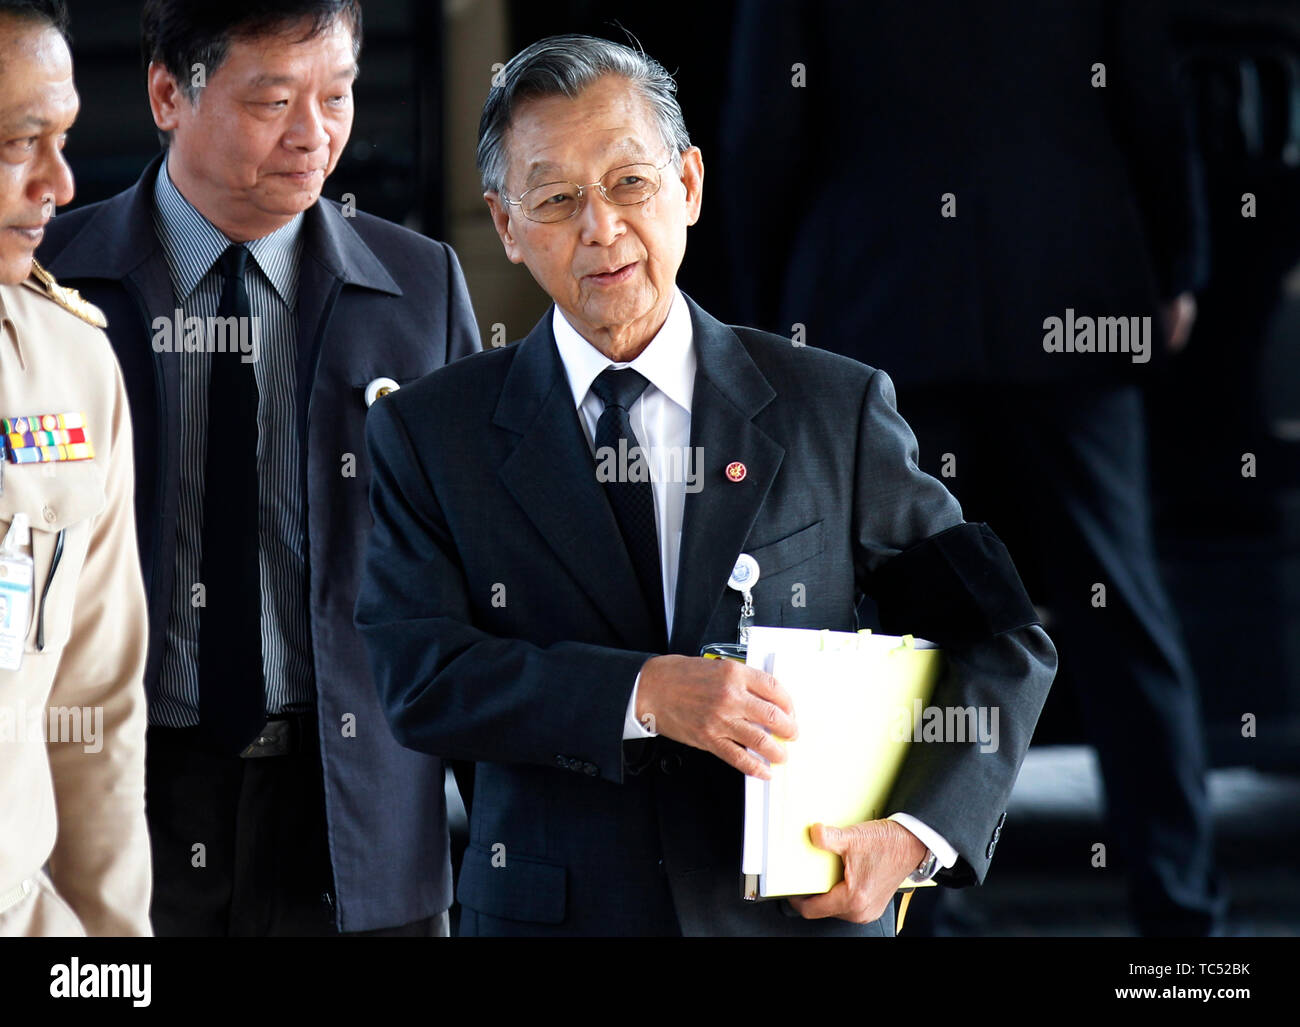 Parliament speaker, Chuan Leekpai (R) arrives to the parliament to vote for Thailand's new prime minister, at TOT Plc' auditorium in Bangkok. Stock Photo